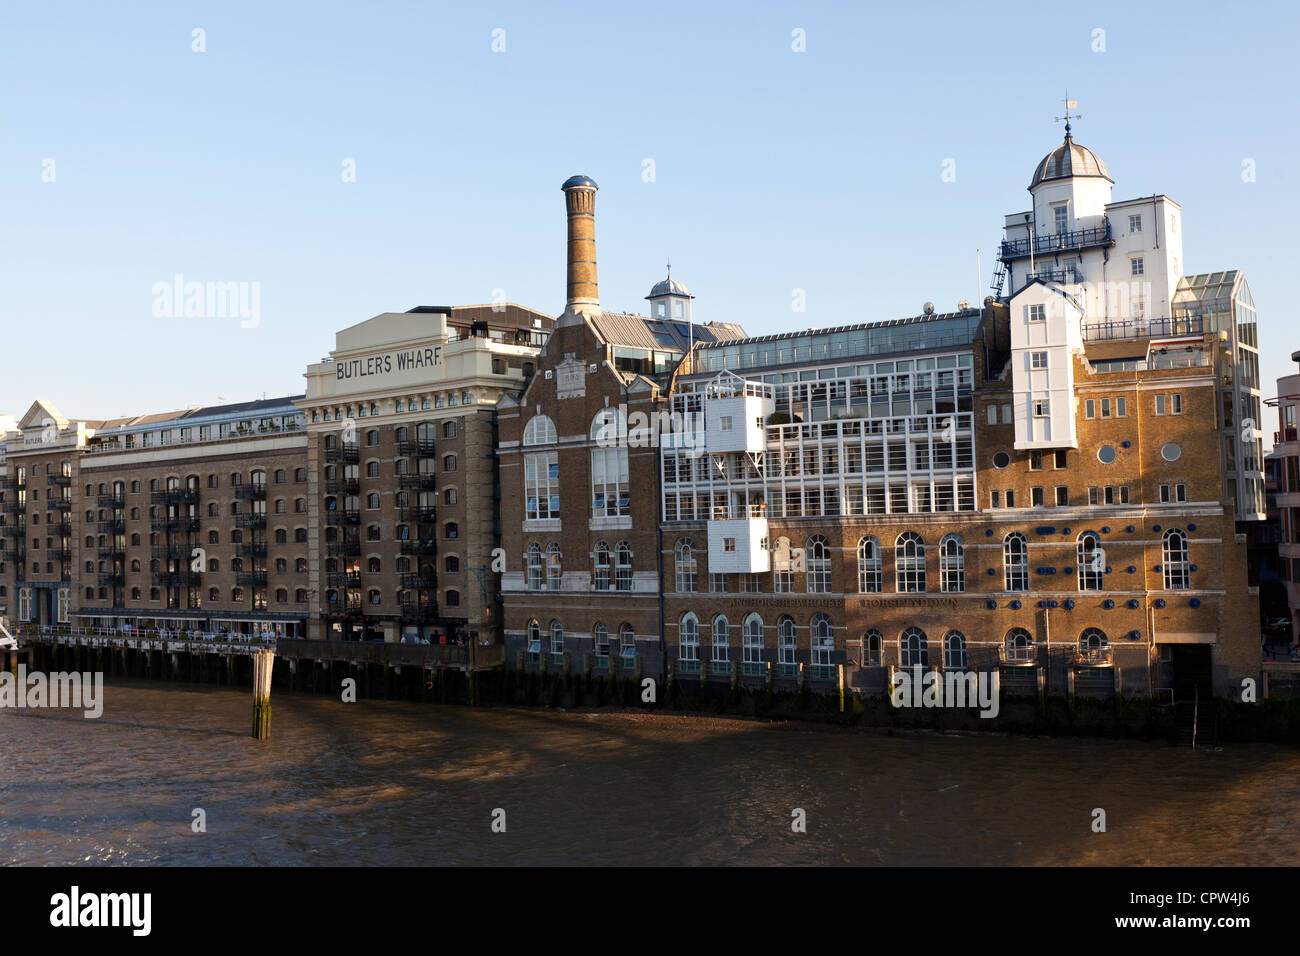 Butler's Wharf is an historic building on the south bank of the River Thames, London, UK. Stock Photo